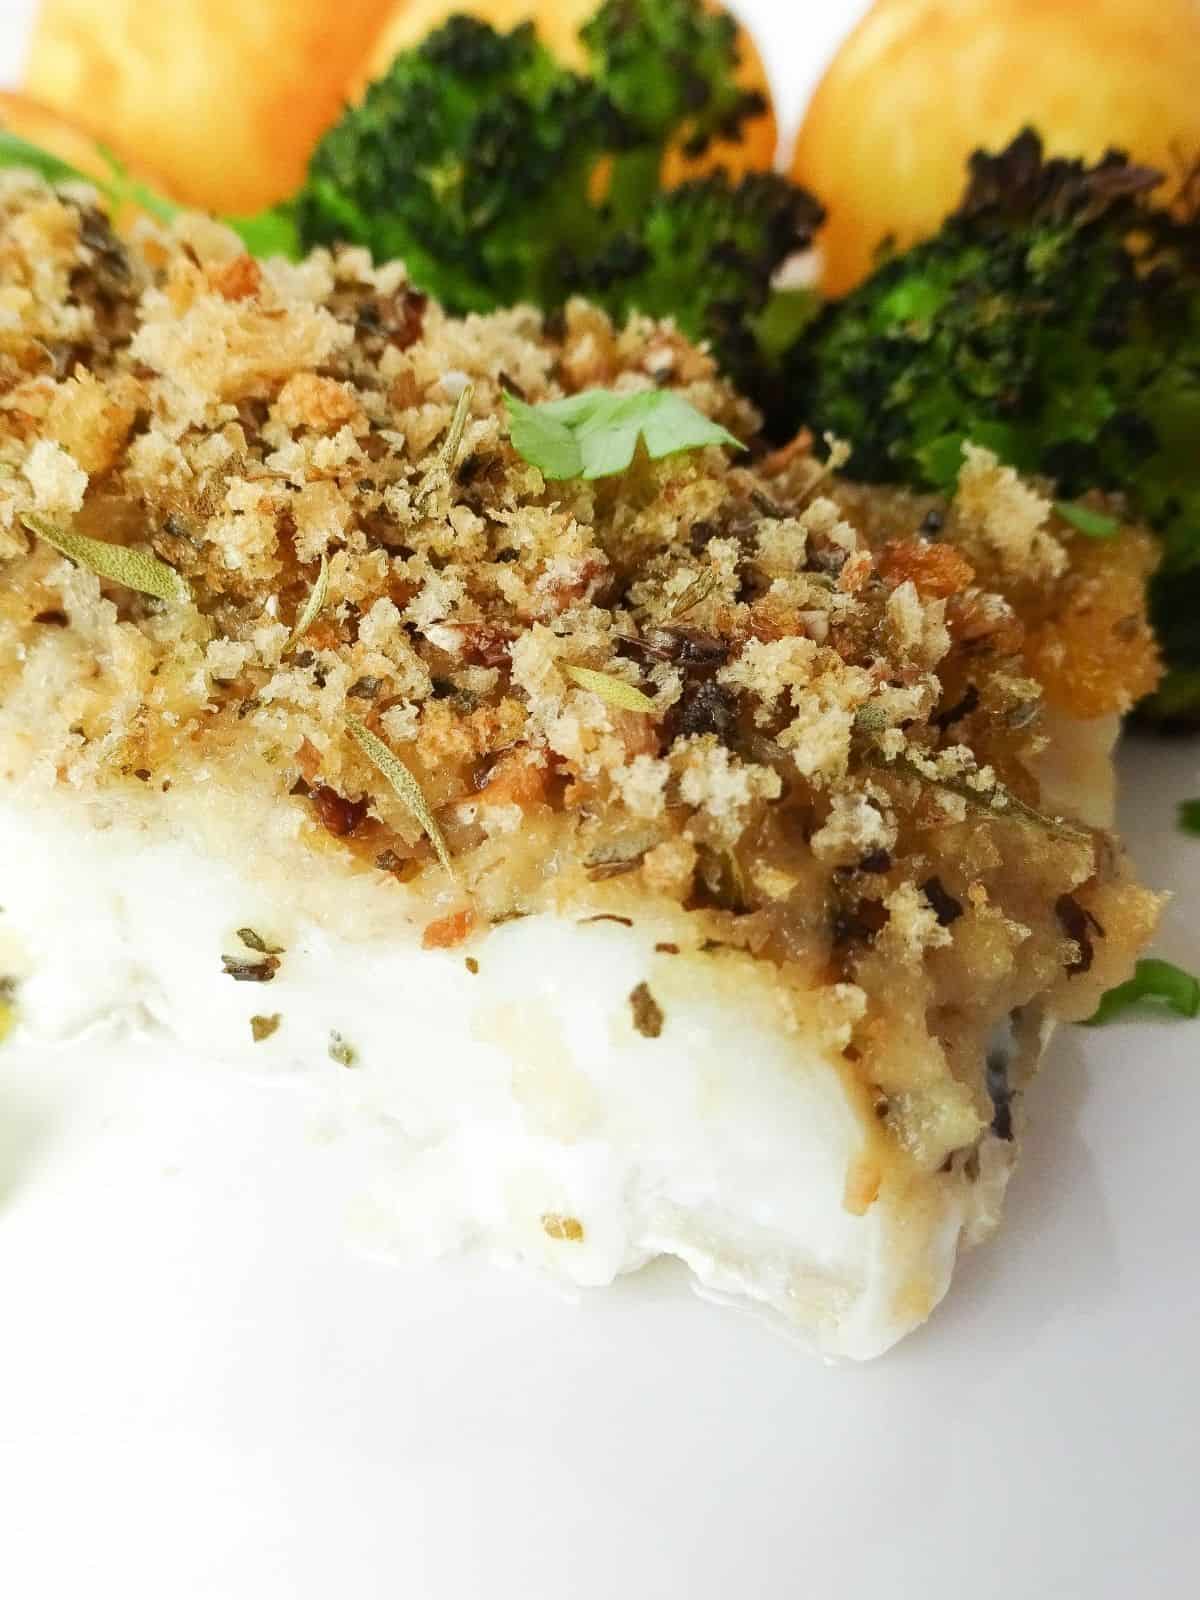 Italian herb crusted cod on a white plate with broccoli and potatoes next to it.